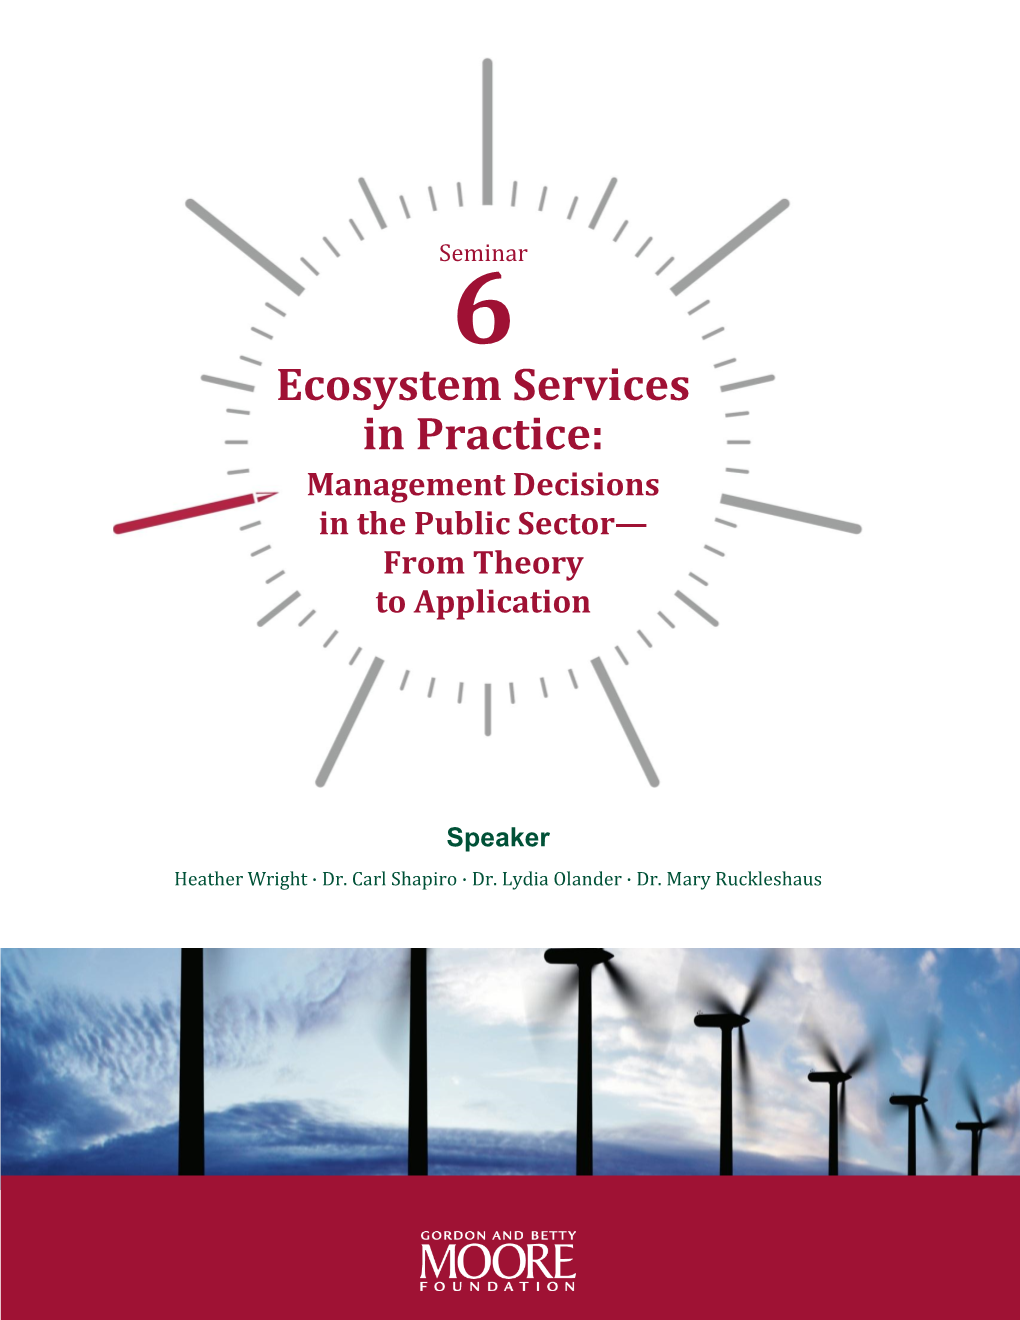 Ecosystem Services in Practice: Management Decisions in the Public Sector— from Theory to Application